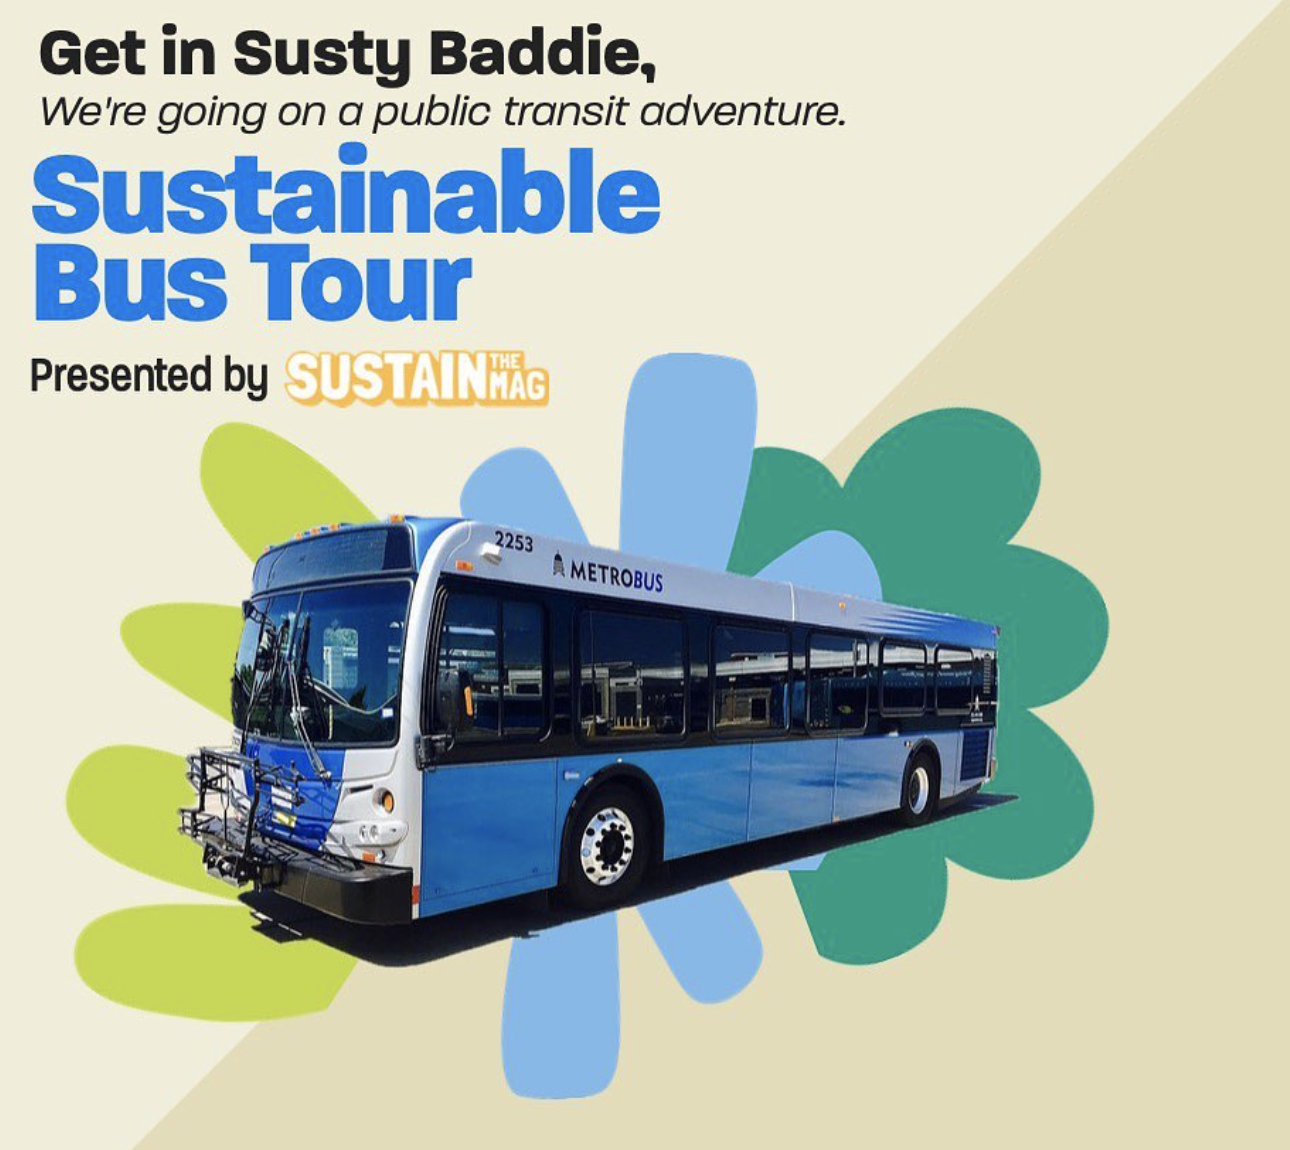 Sustainable Bus Tour